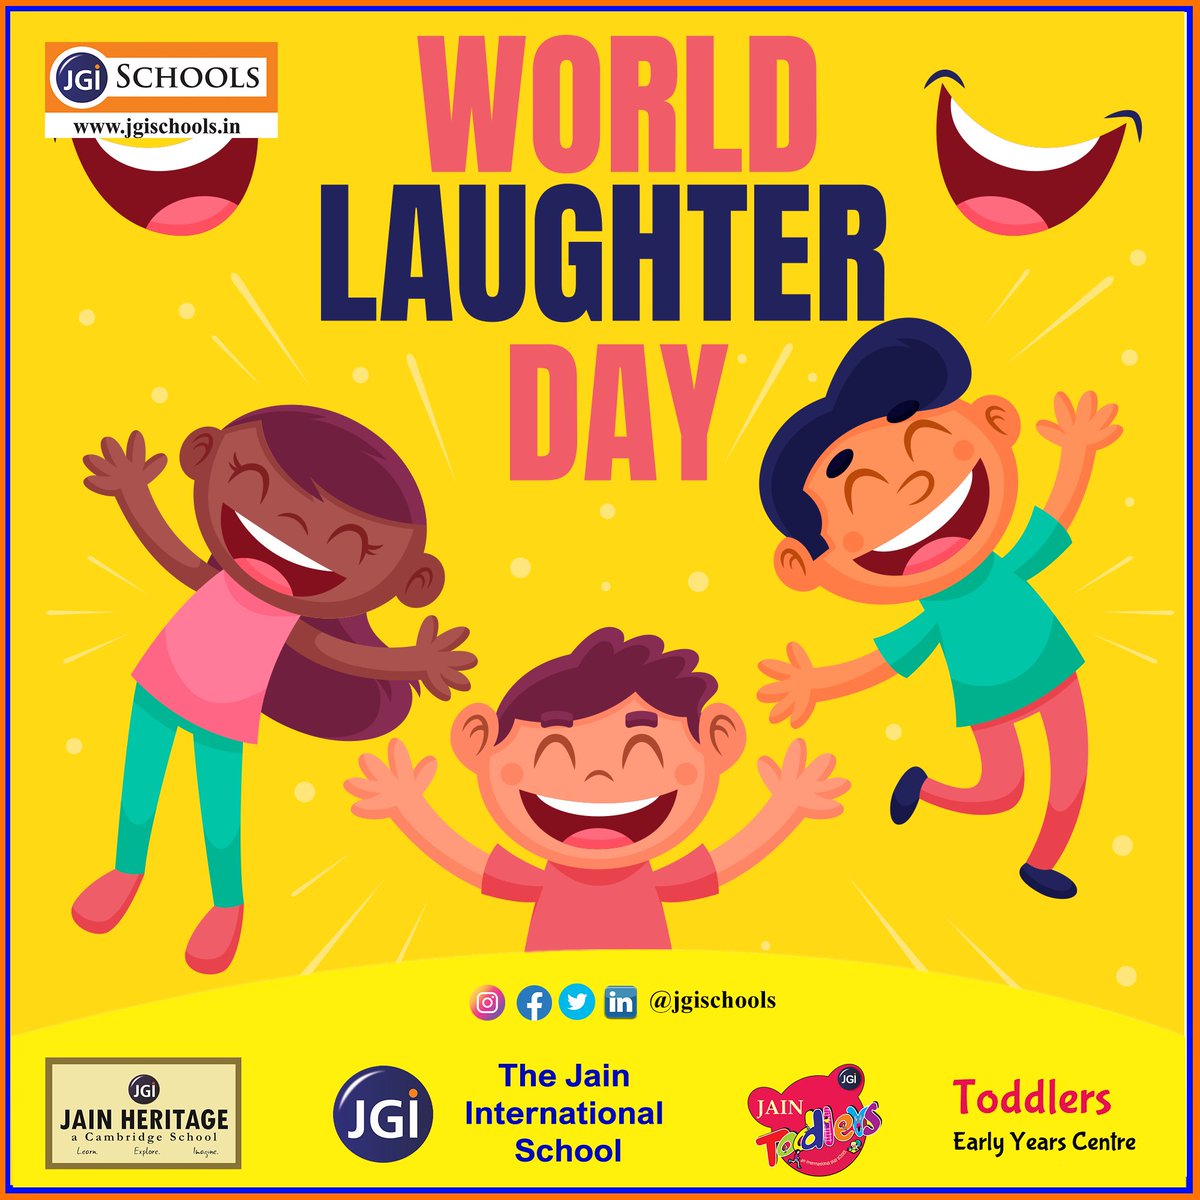 Keeping Laughing, Stay Happy! 😄🎉 

Happy World Laughter Day Everyone! 🌟🤗

#WorldLaughterDay #SpreadJoy #LaughMore #GiggleFest #HappinessIsContagious #SmileEveryday #LaughterIsMedicine #LaughOutLoud #JoyfulJourney #KeepLaughing #jgischools #education #hyderabad #india